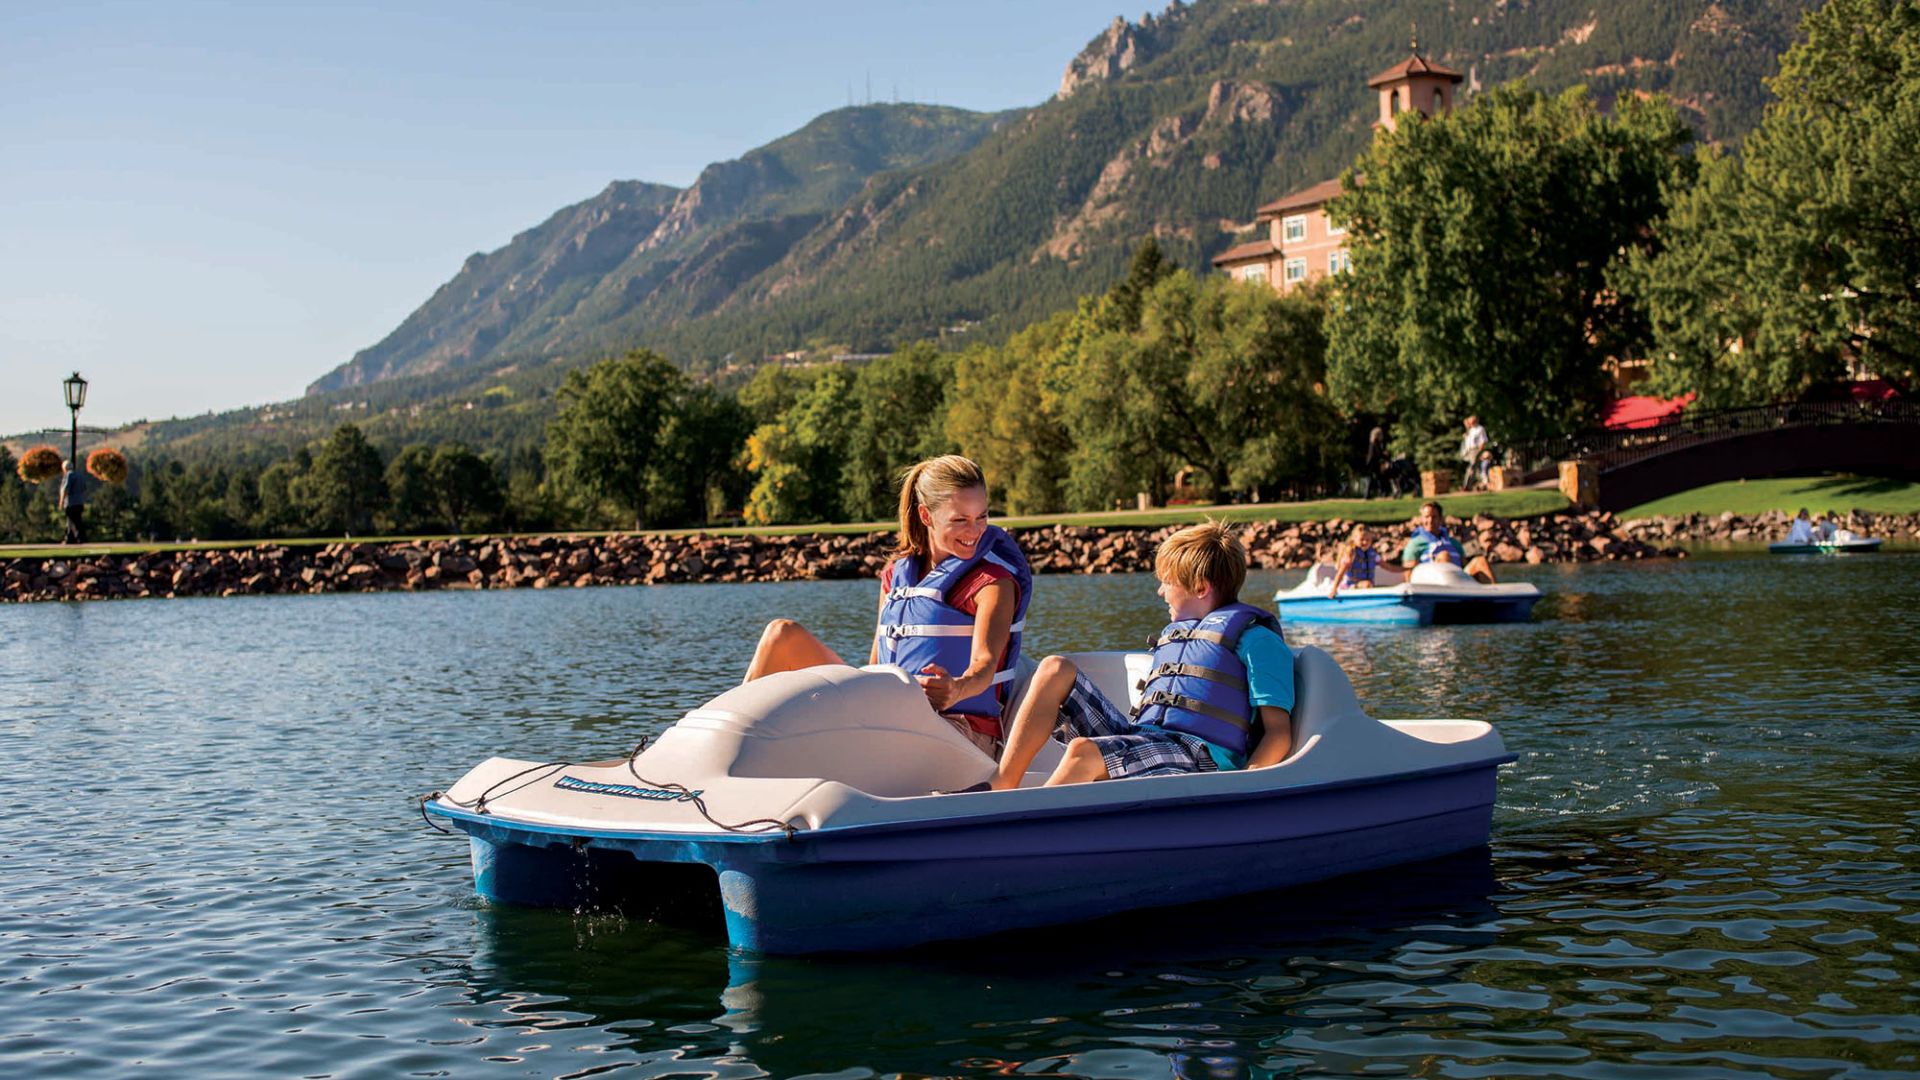 A Group Of People Riding On The Back Of A Boat In The Water